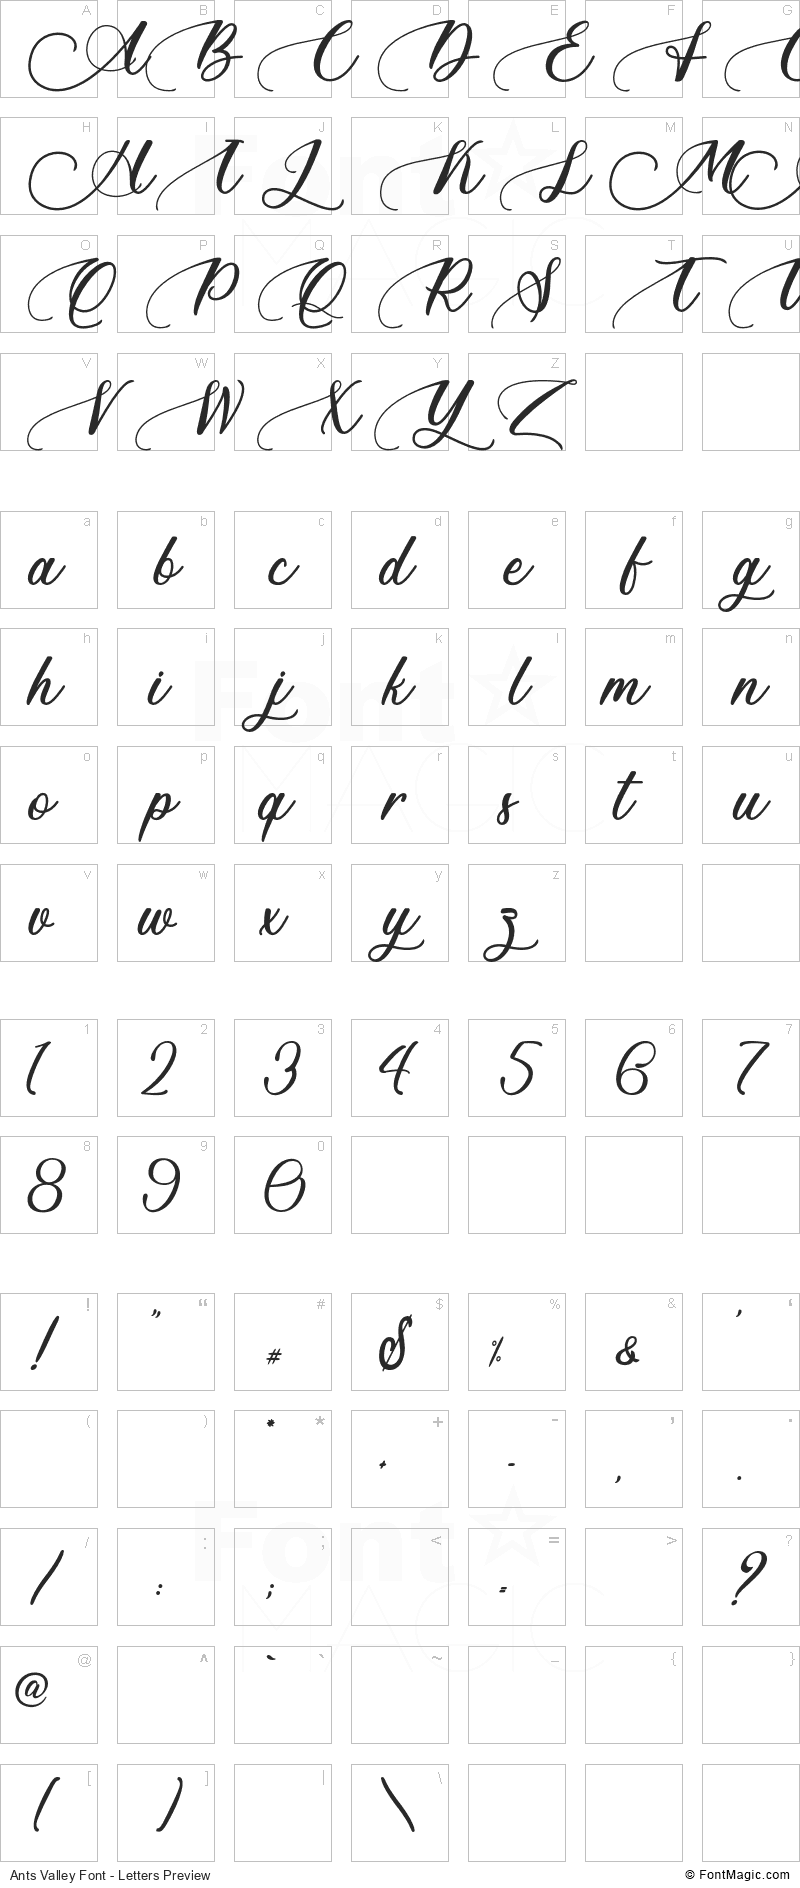 Ants Valley Font - All Latters Preview Chart